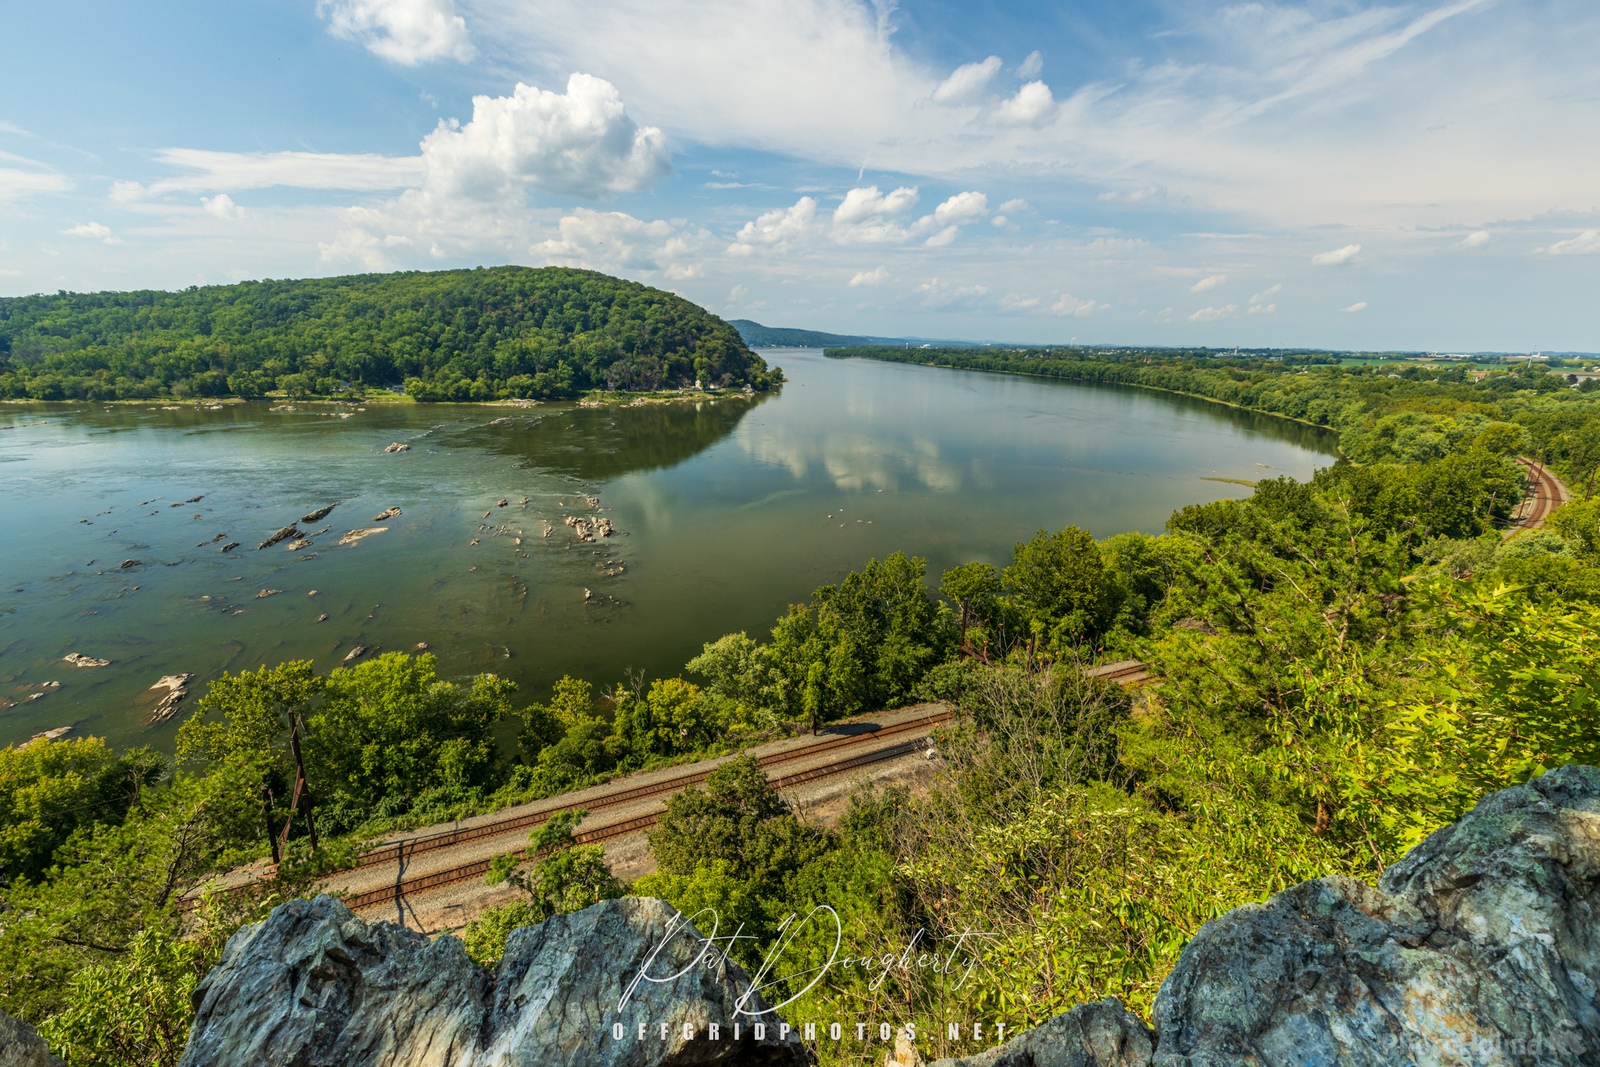 Image of Chickies Rock Overlook by Patrick Dougherty